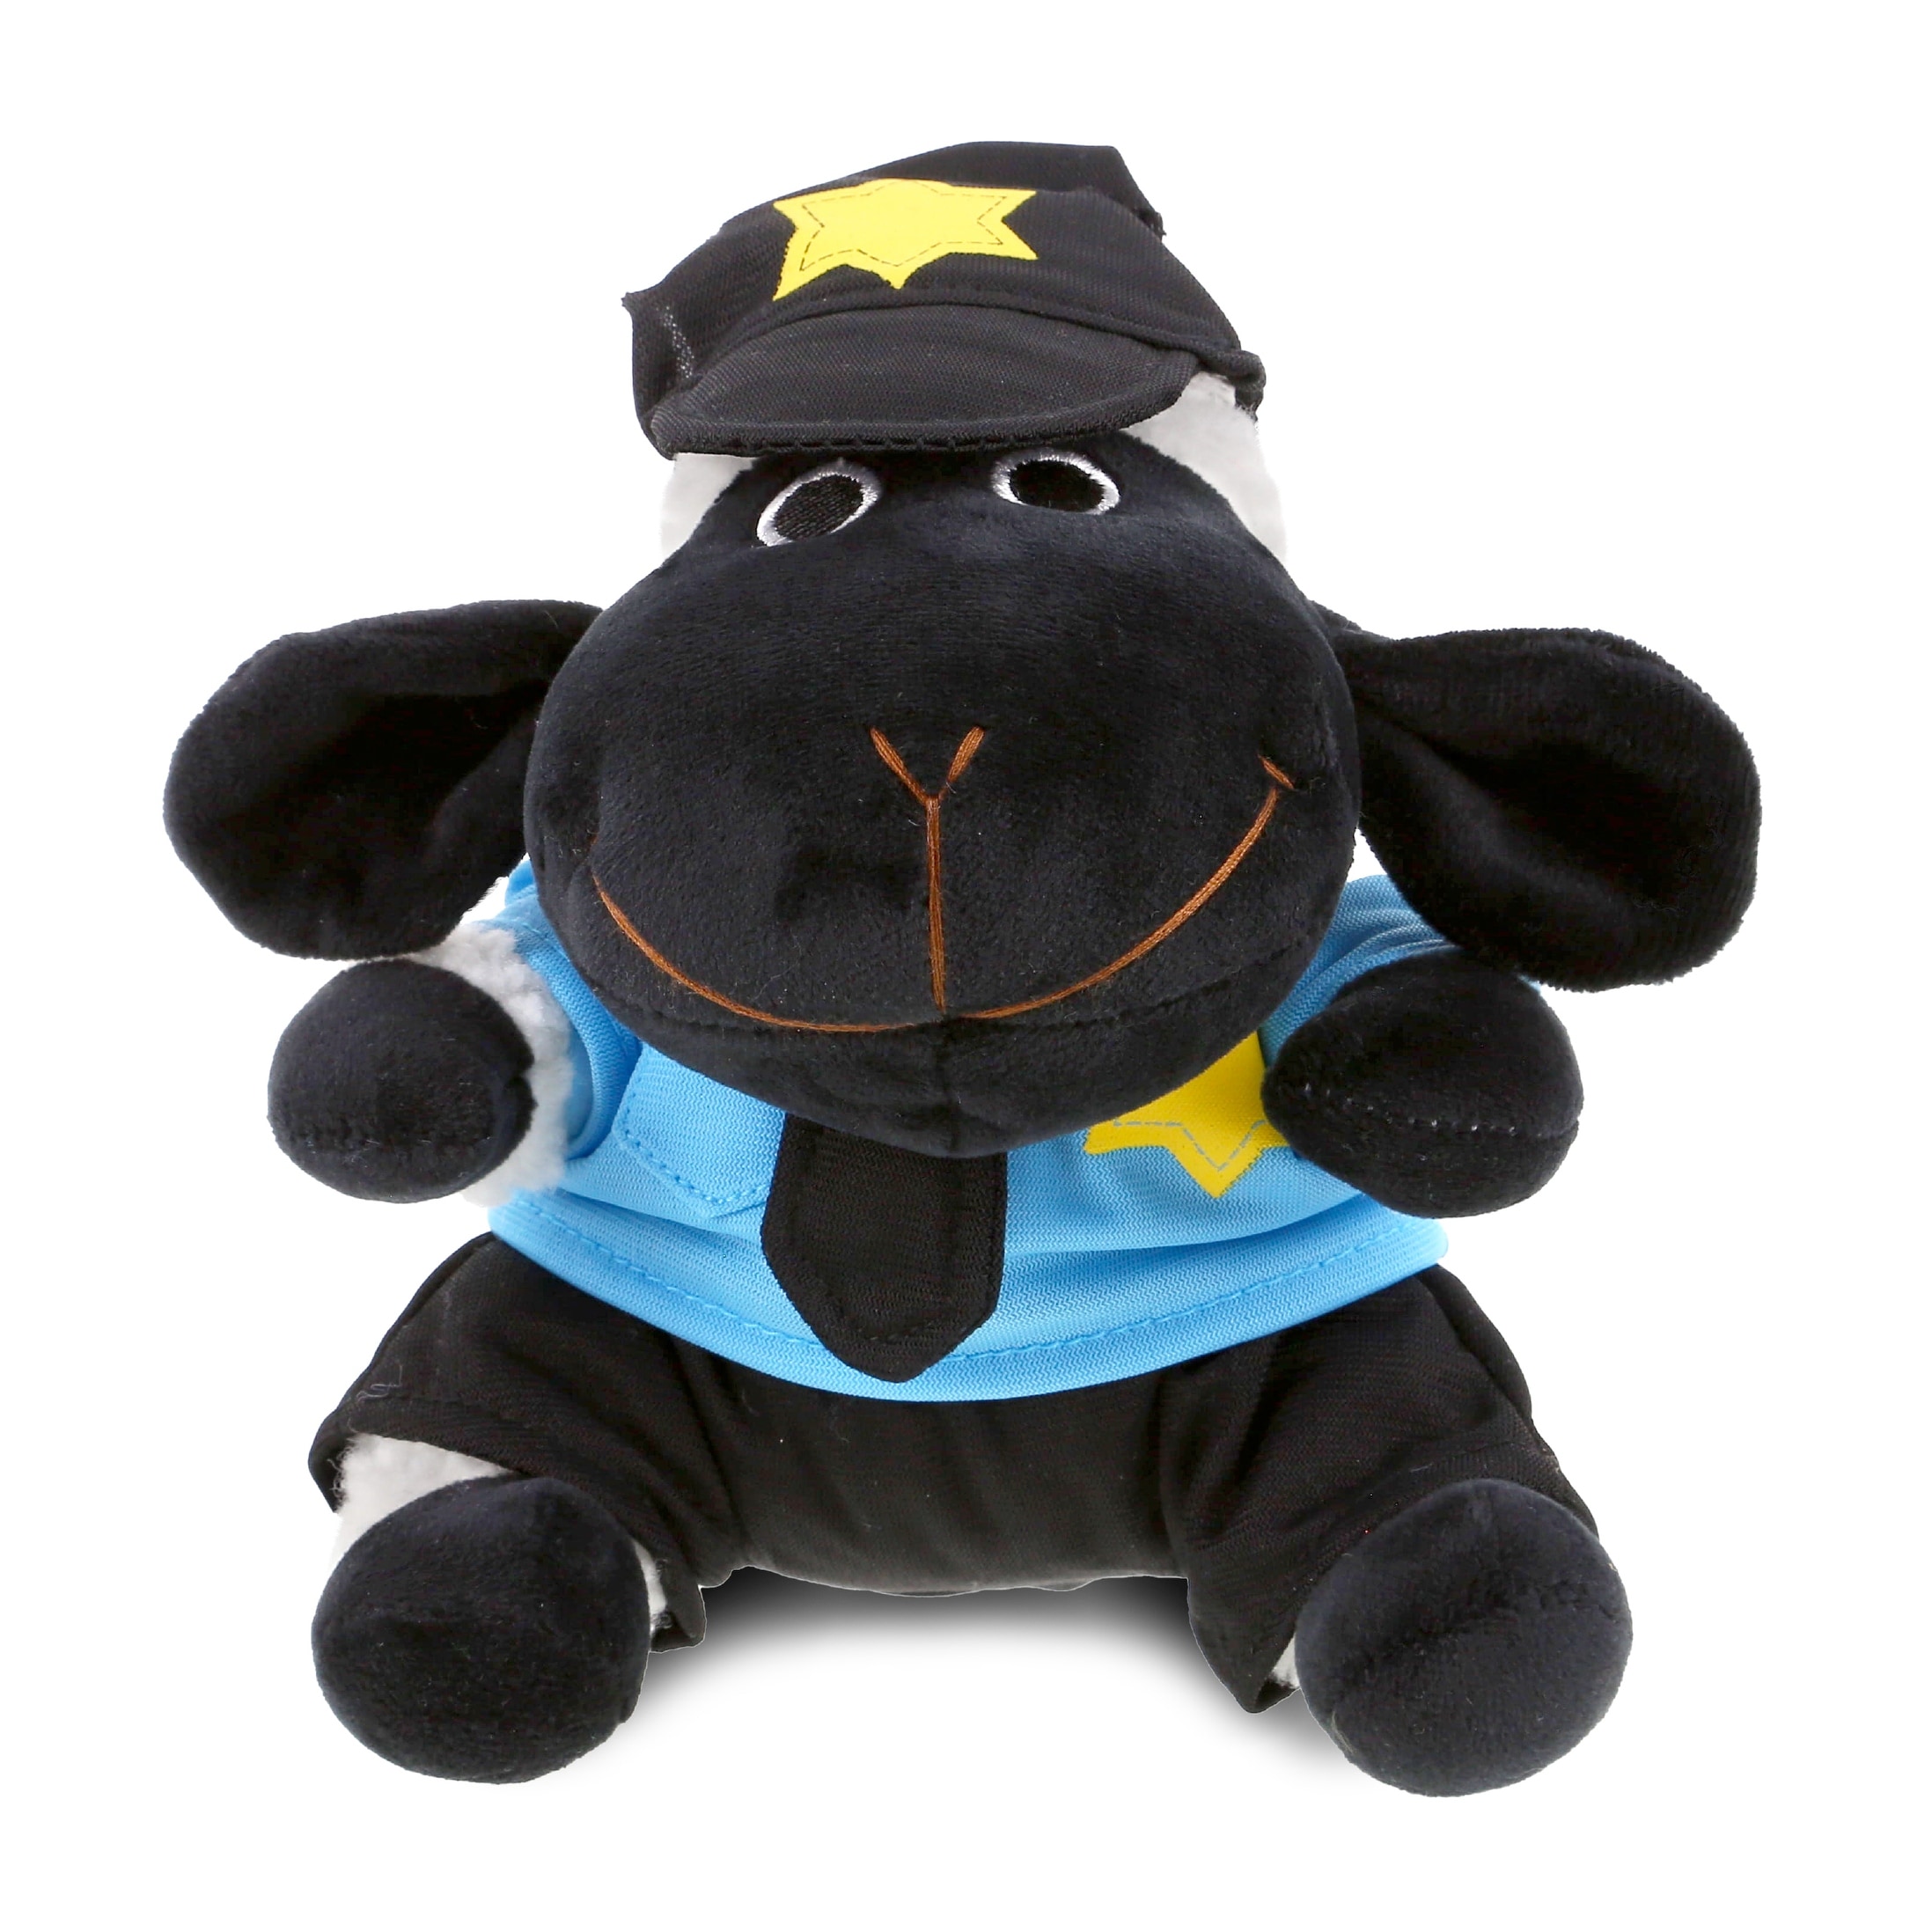 DolliBu Black Nose Sheep Police Officer Plush with Uniform and Cap - 6  inches - Bed Bath & Beyond - 37837257